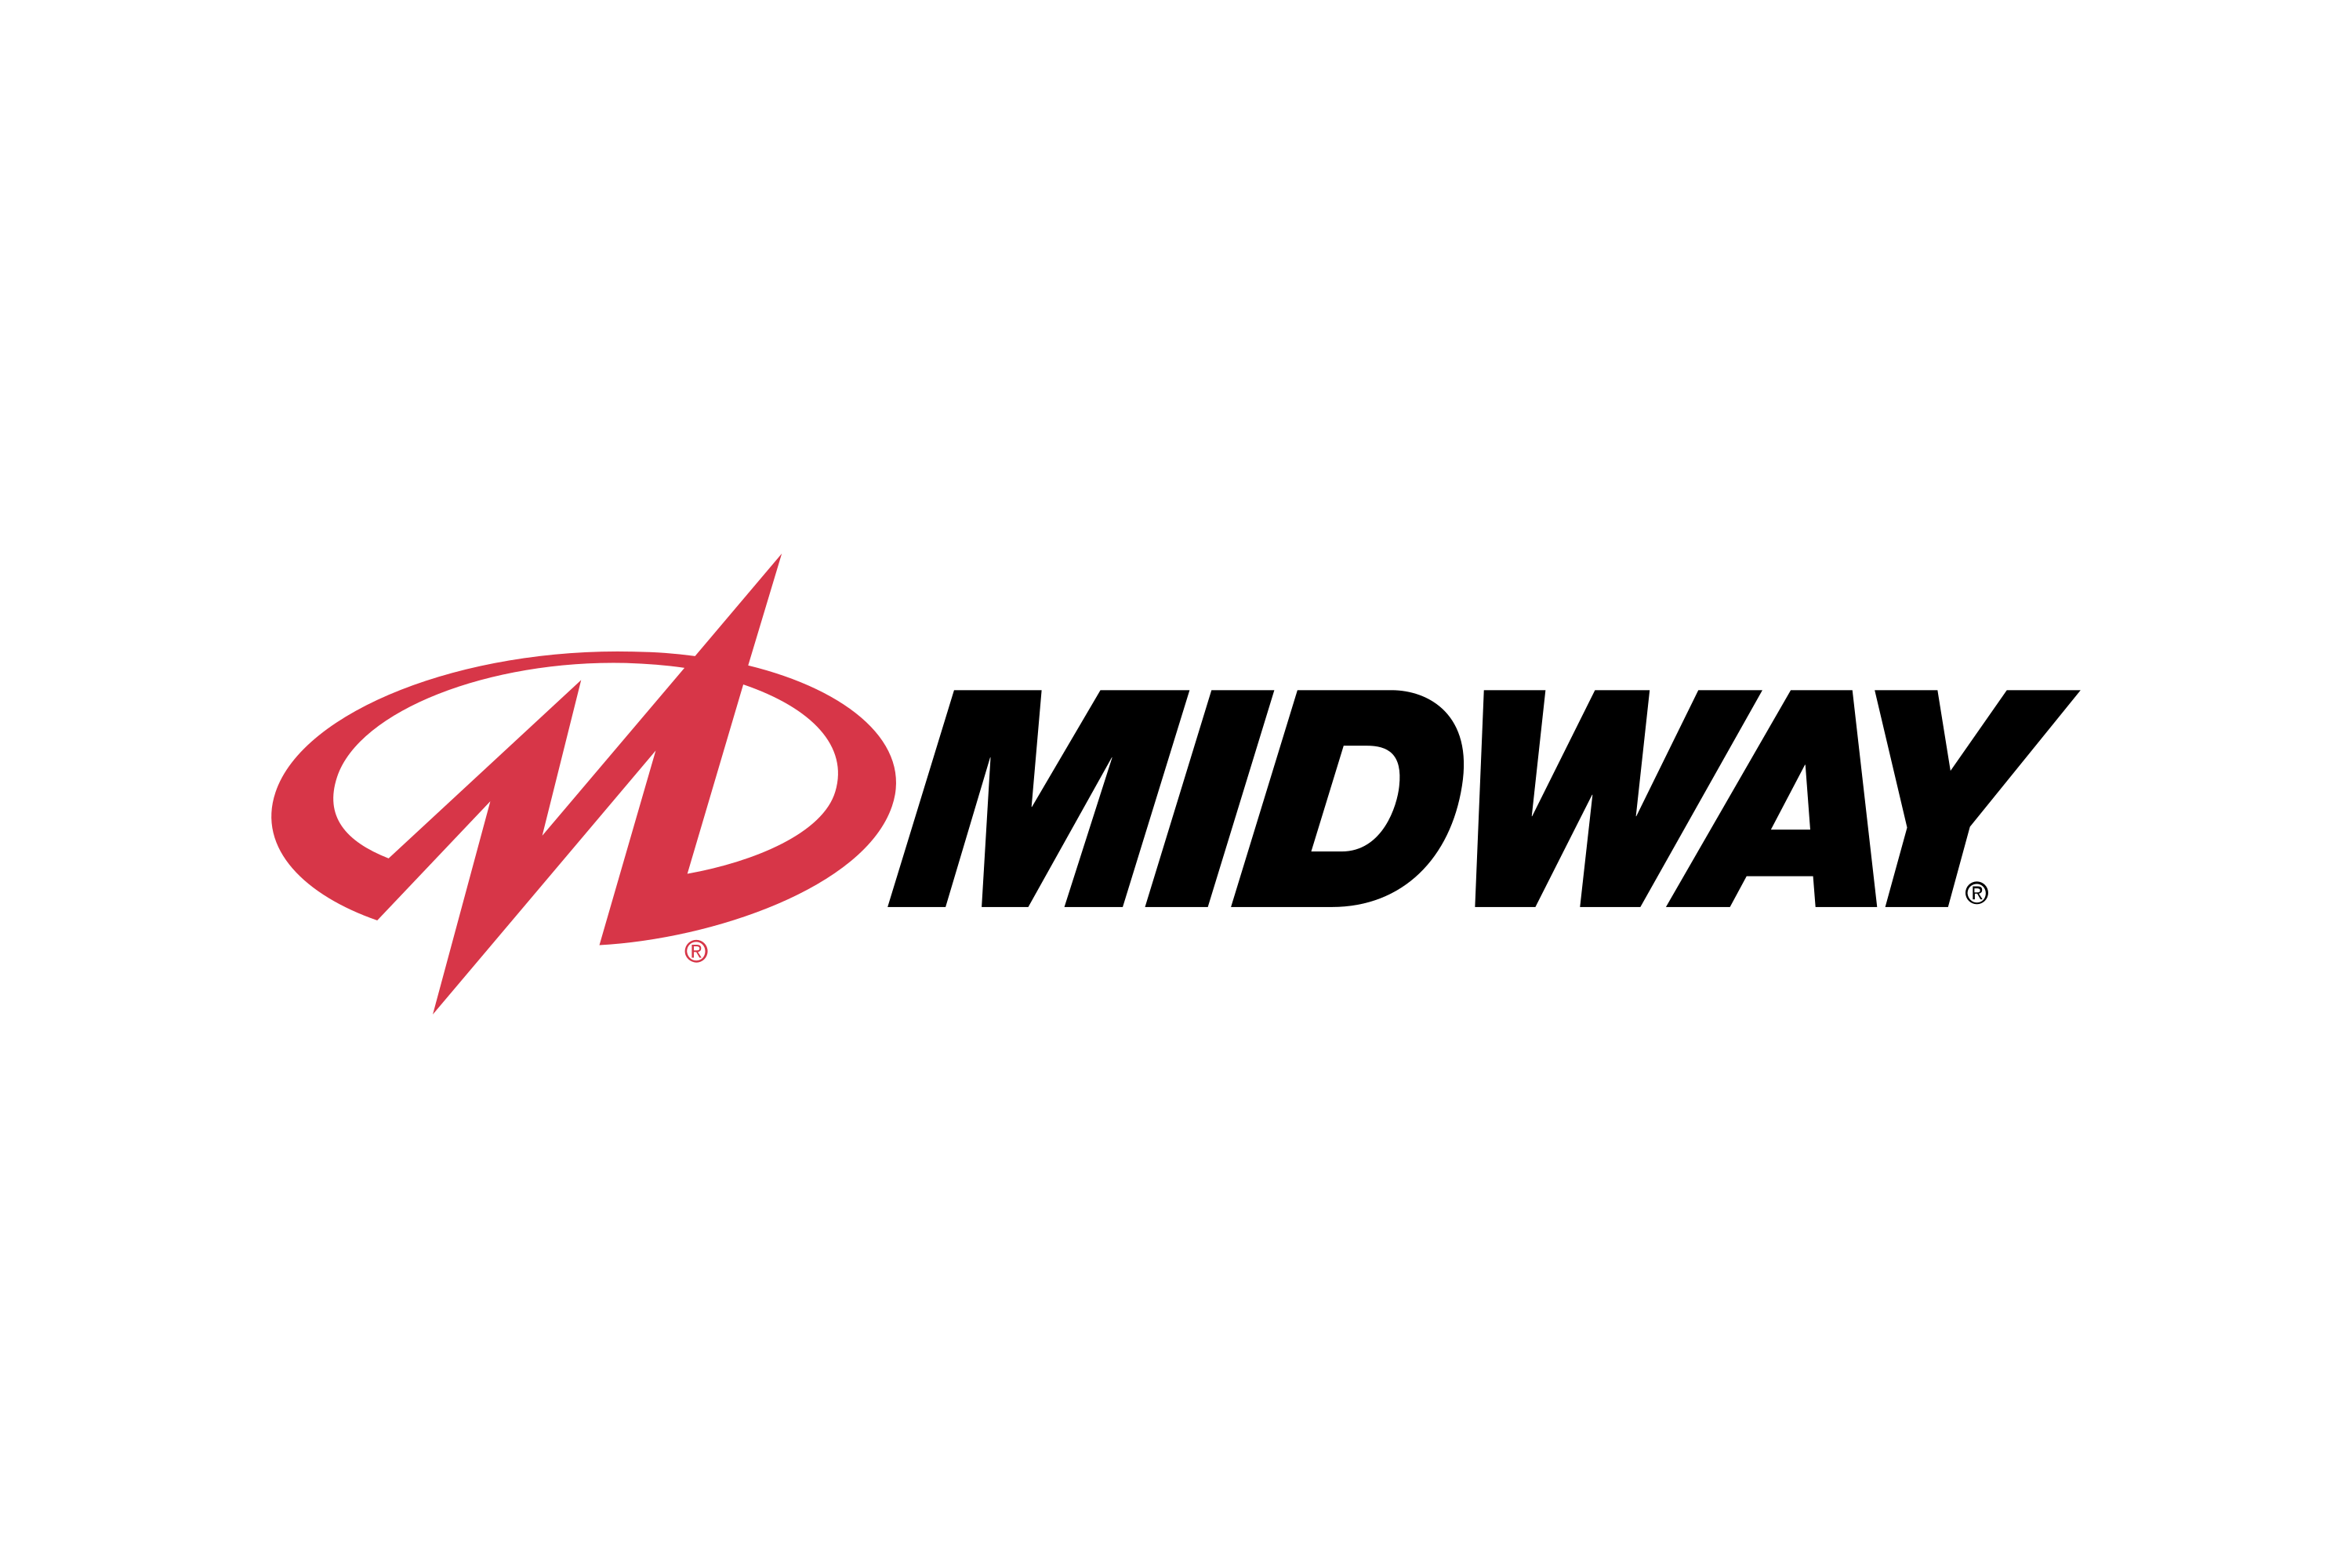 Download Midway Games Logo in SVG Vector or PNG File Format - Logo.wine